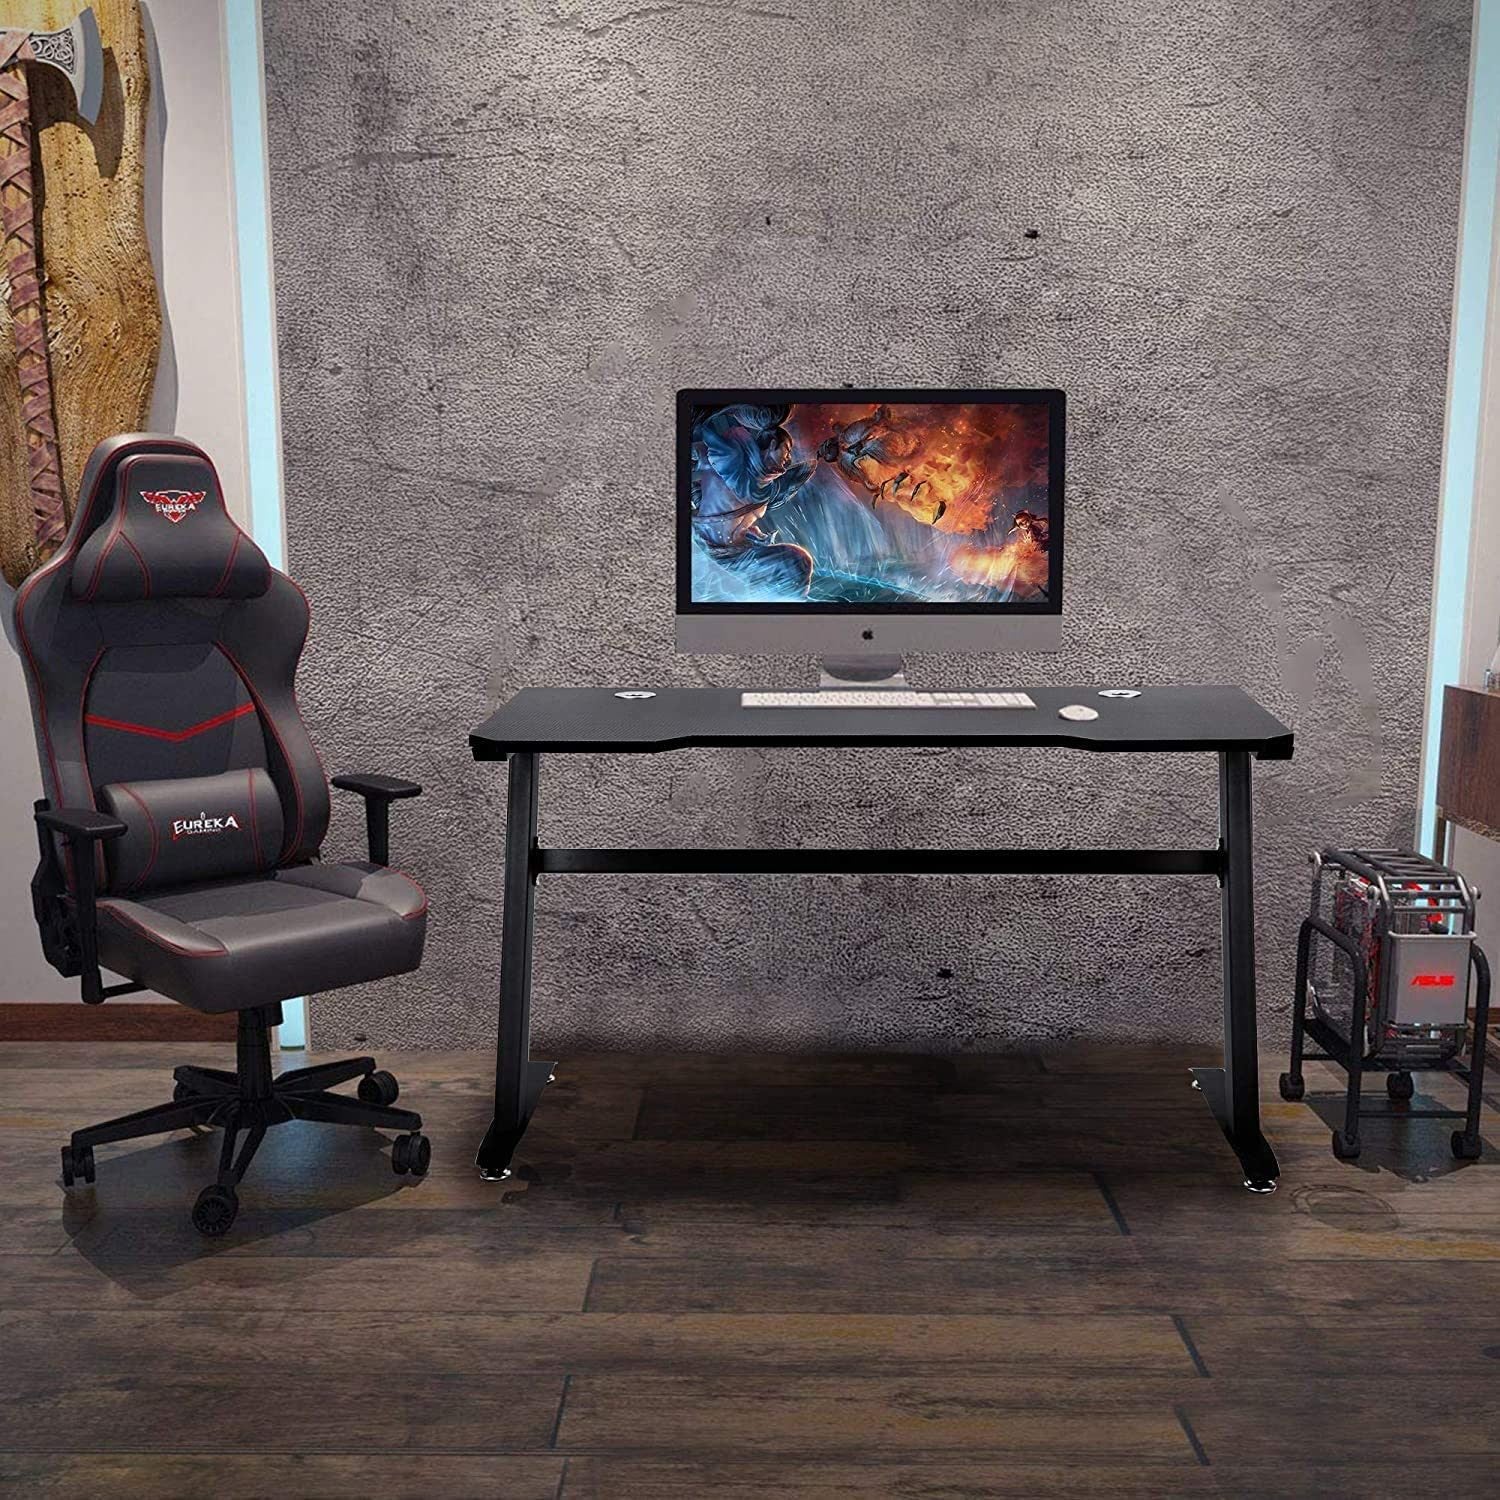 Gaming Table 47.2" W x 23.6" D Home Office Computer PC Desk Gaming Table Curve Design for Men Boyfriend Female Gift, Black Gamer Workstation, with 2 Cable Management Holes XH